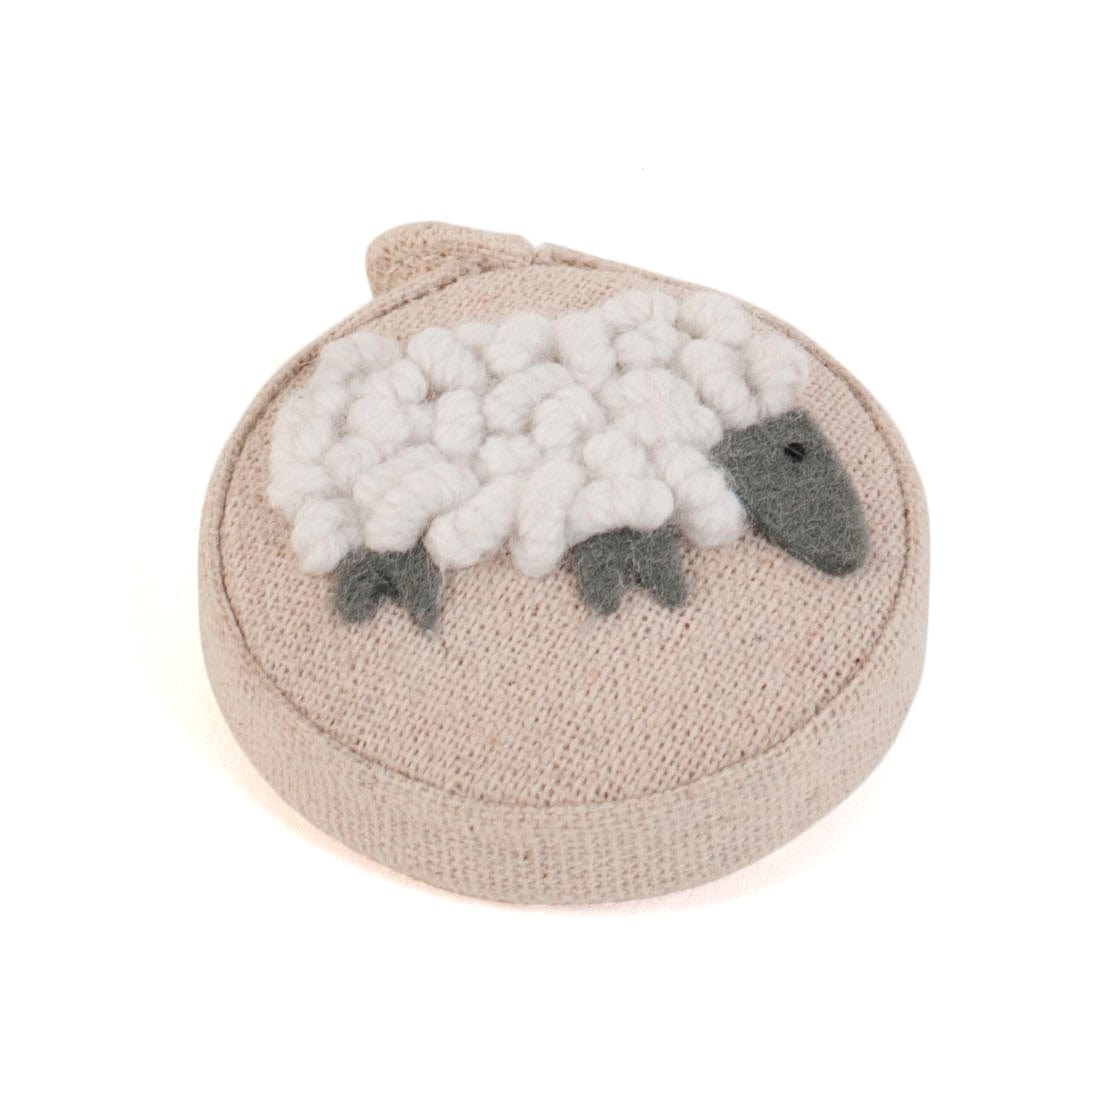 Sheep Embroidered Tape Measure